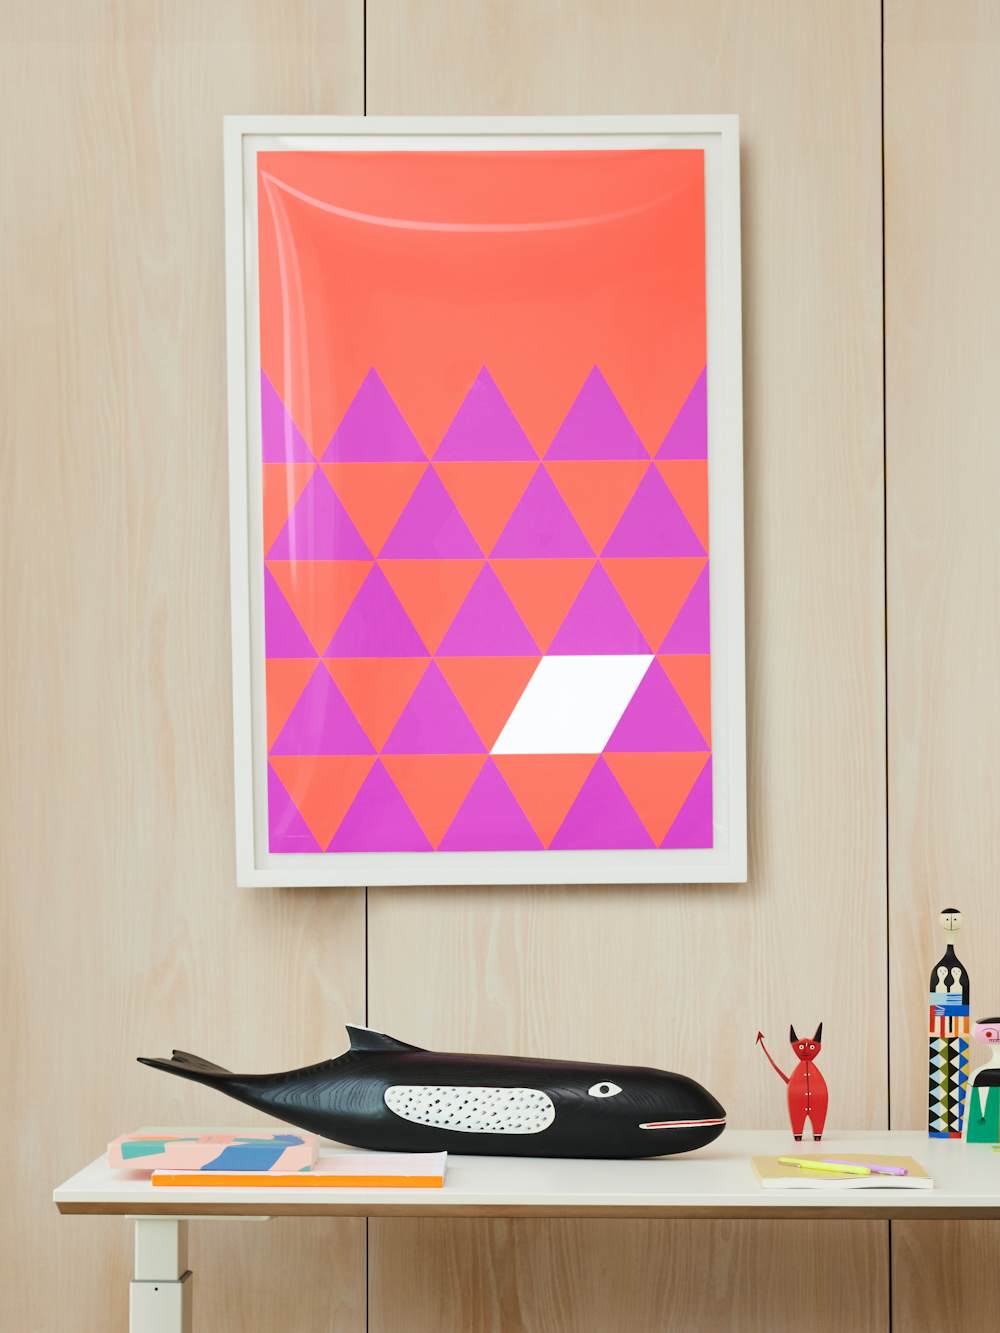 Eames Lounge Chair and Ottoman,  Renew Desk,  Aeron Chair,  Eames House Whale,  Nelson Pop Art Triangles Poster